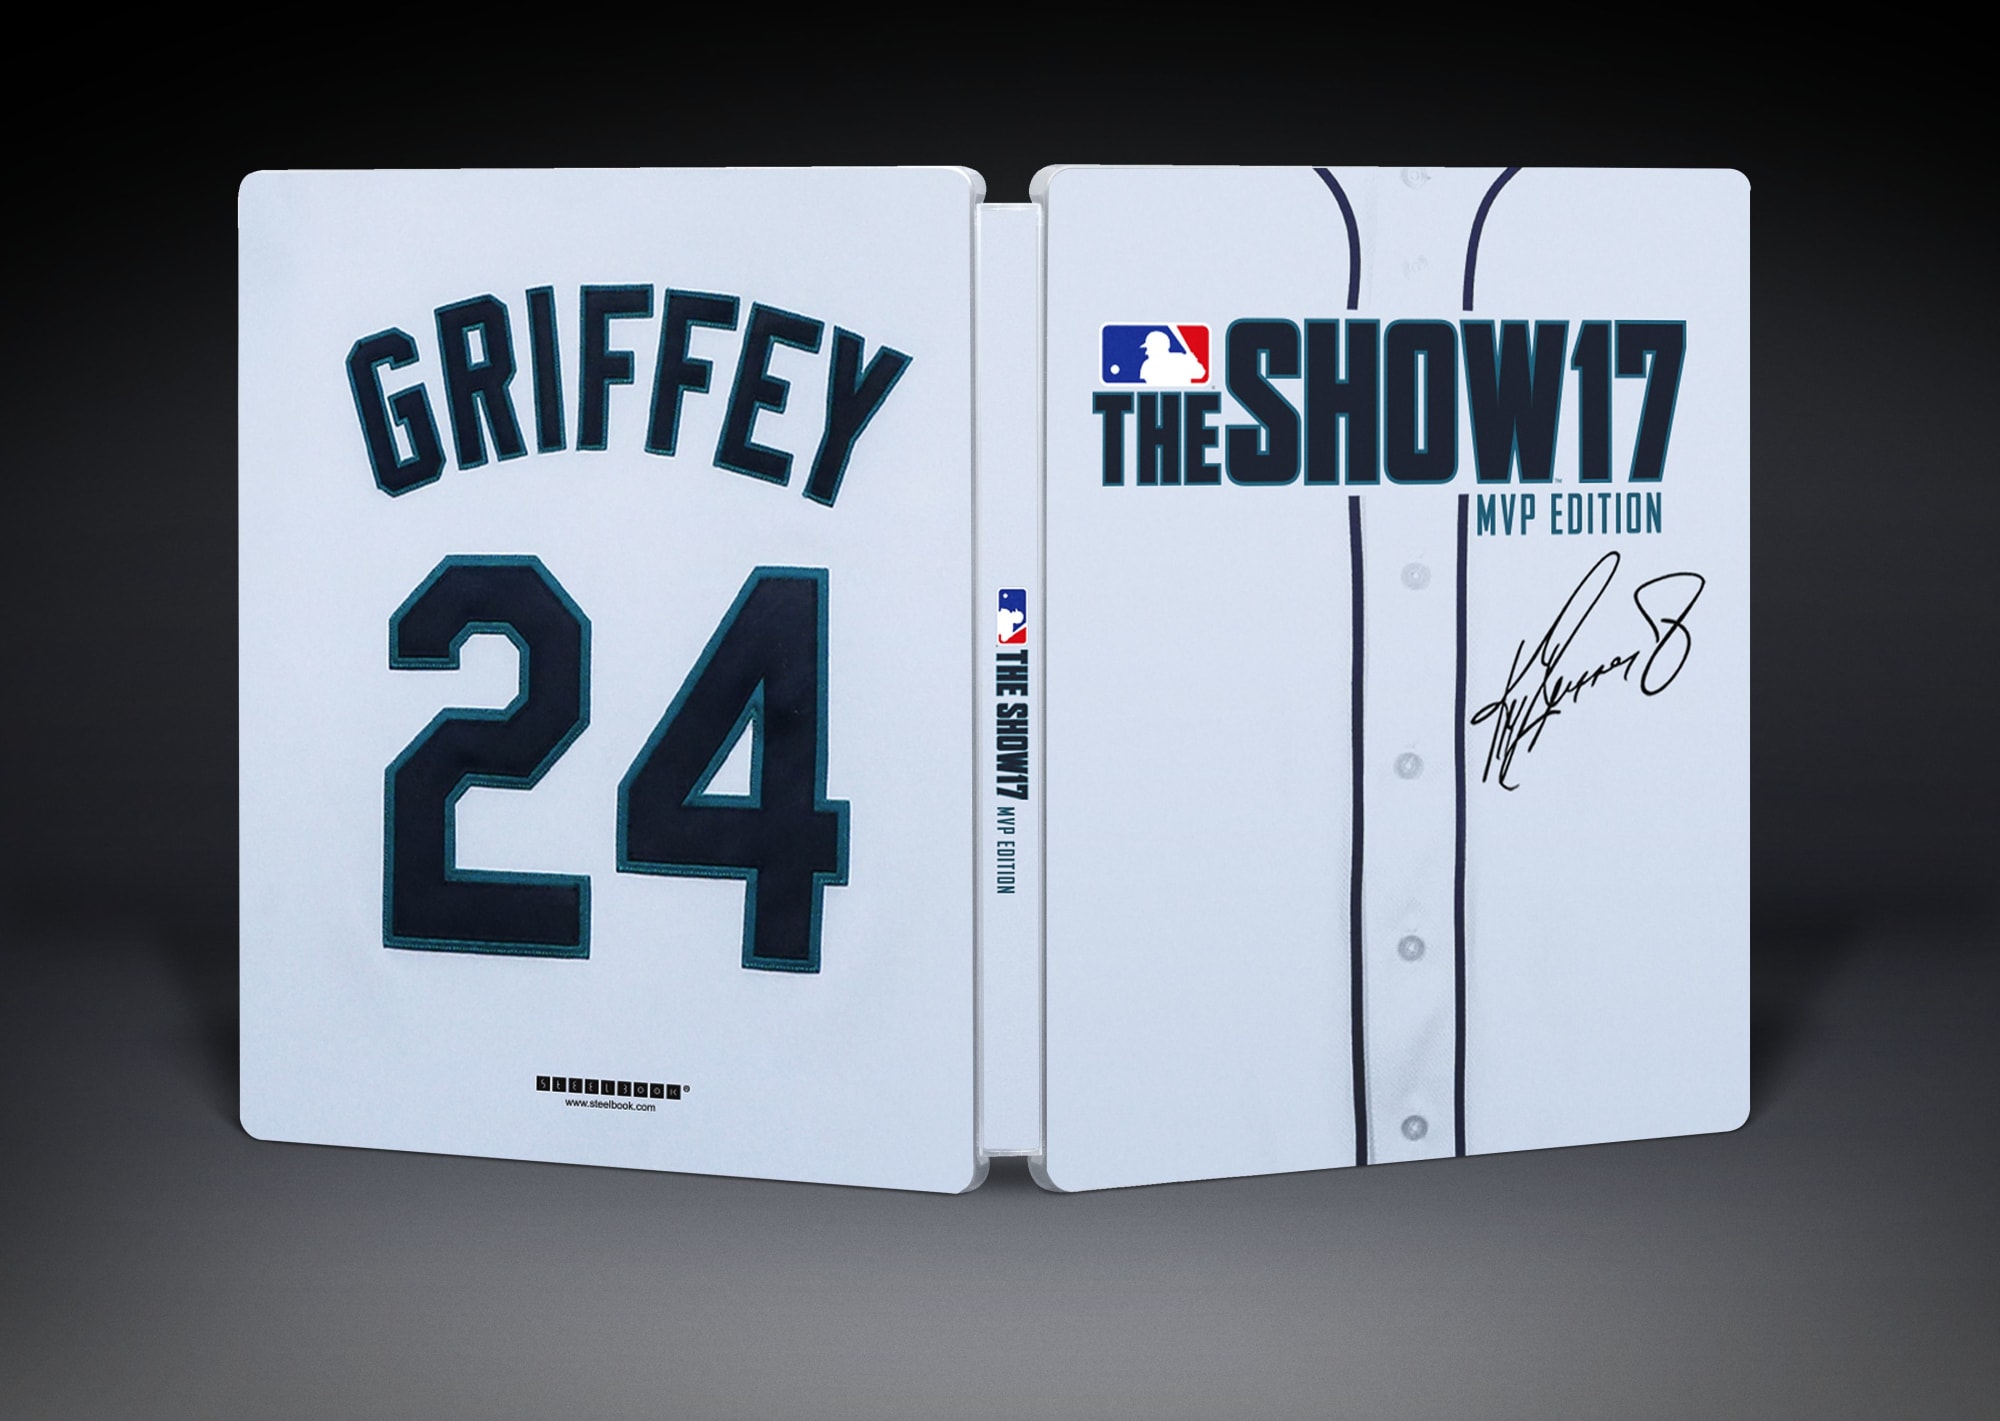 mlb the show 17 trophy guide